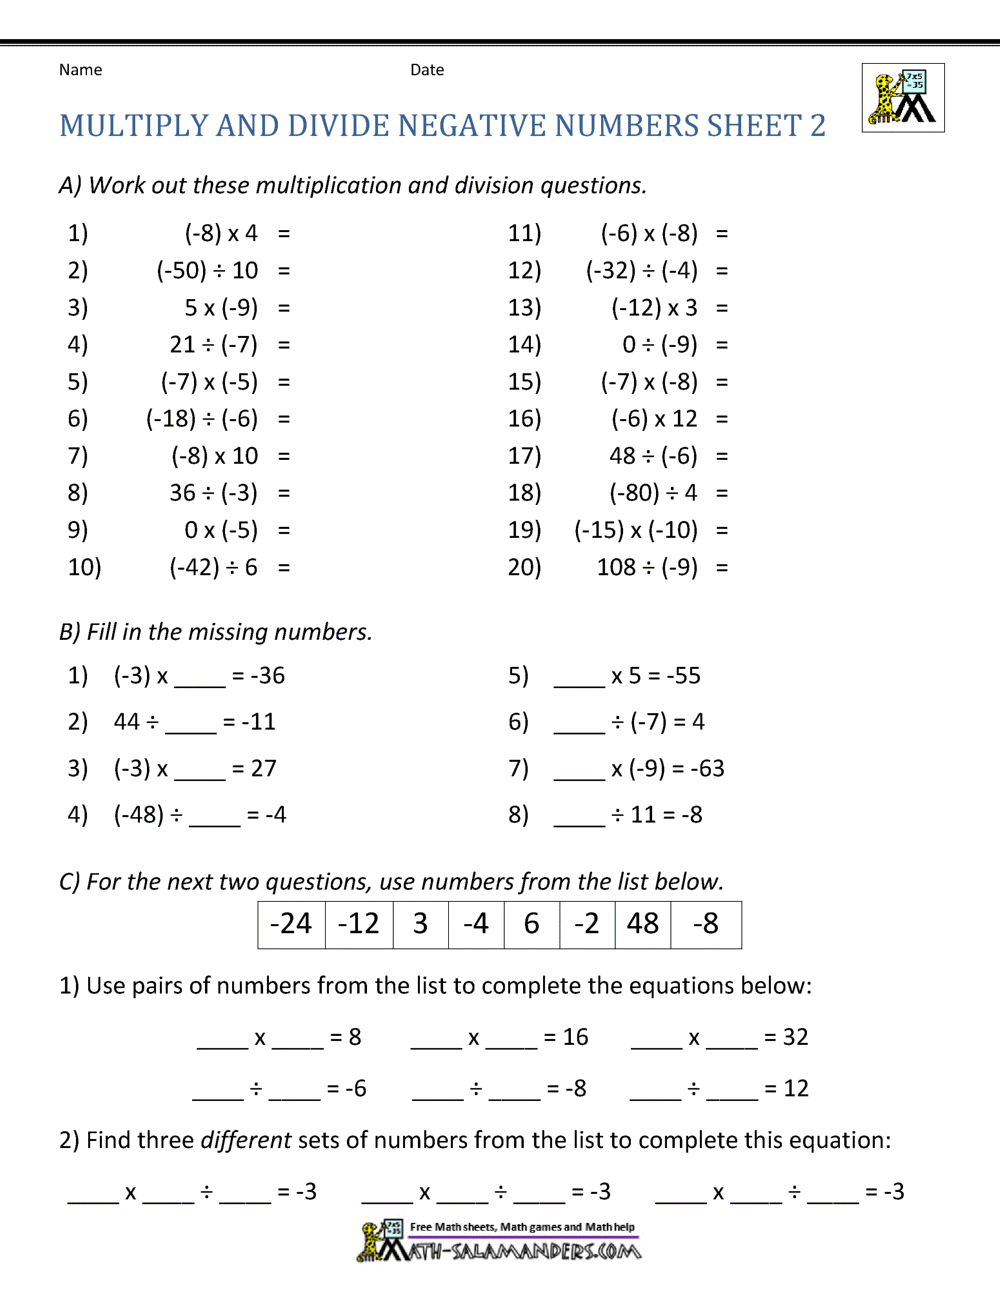 Multiply and Divide Negative Numbers For Multiplication Of Integers Worksheet